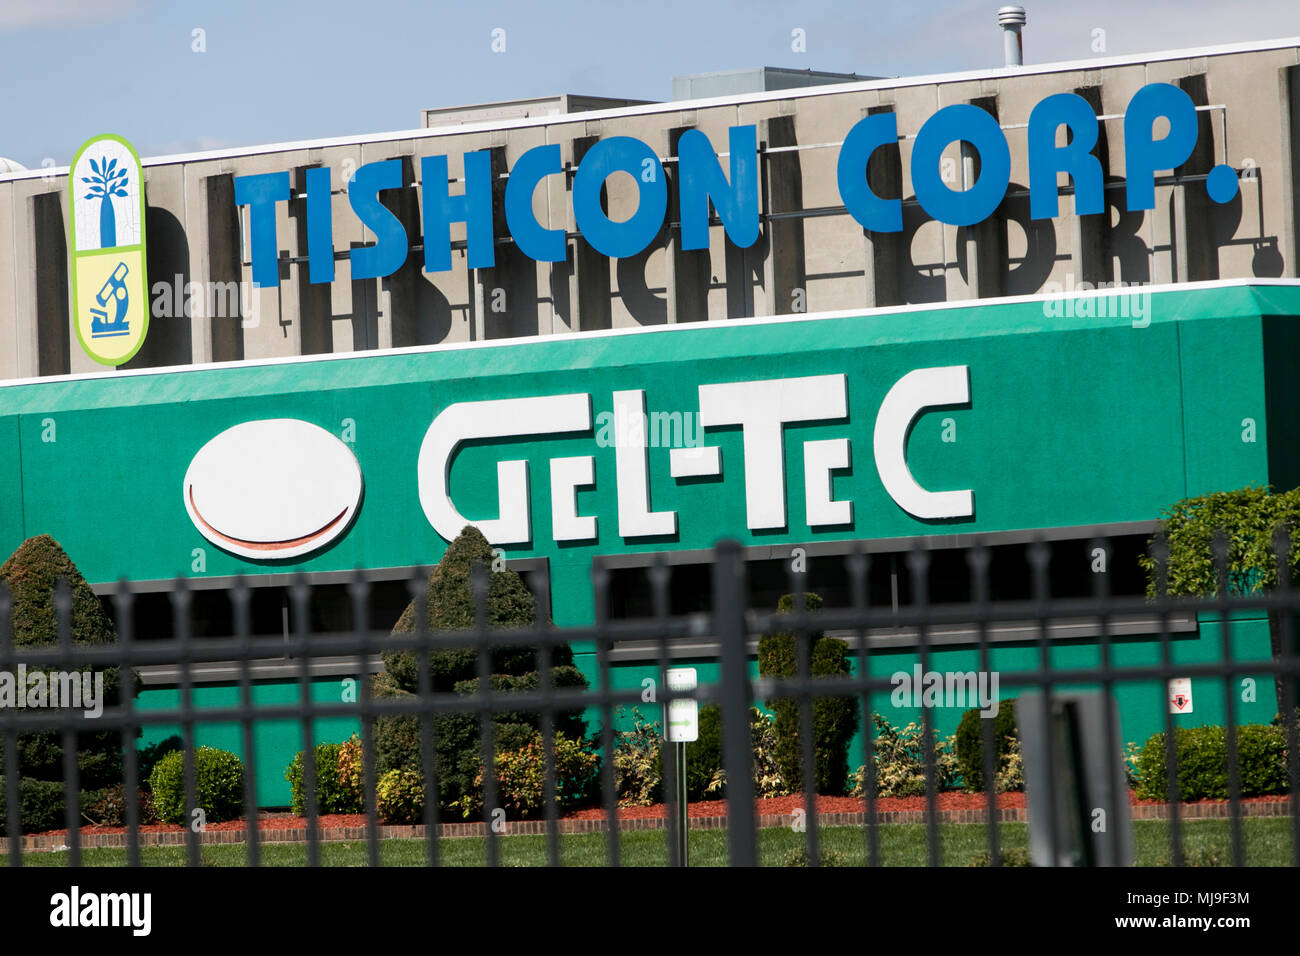 A logo sign outside of a facility occupied by Tishcon Corp., in Salisbury, Maryland, on April 29, 2018. Stock Photo